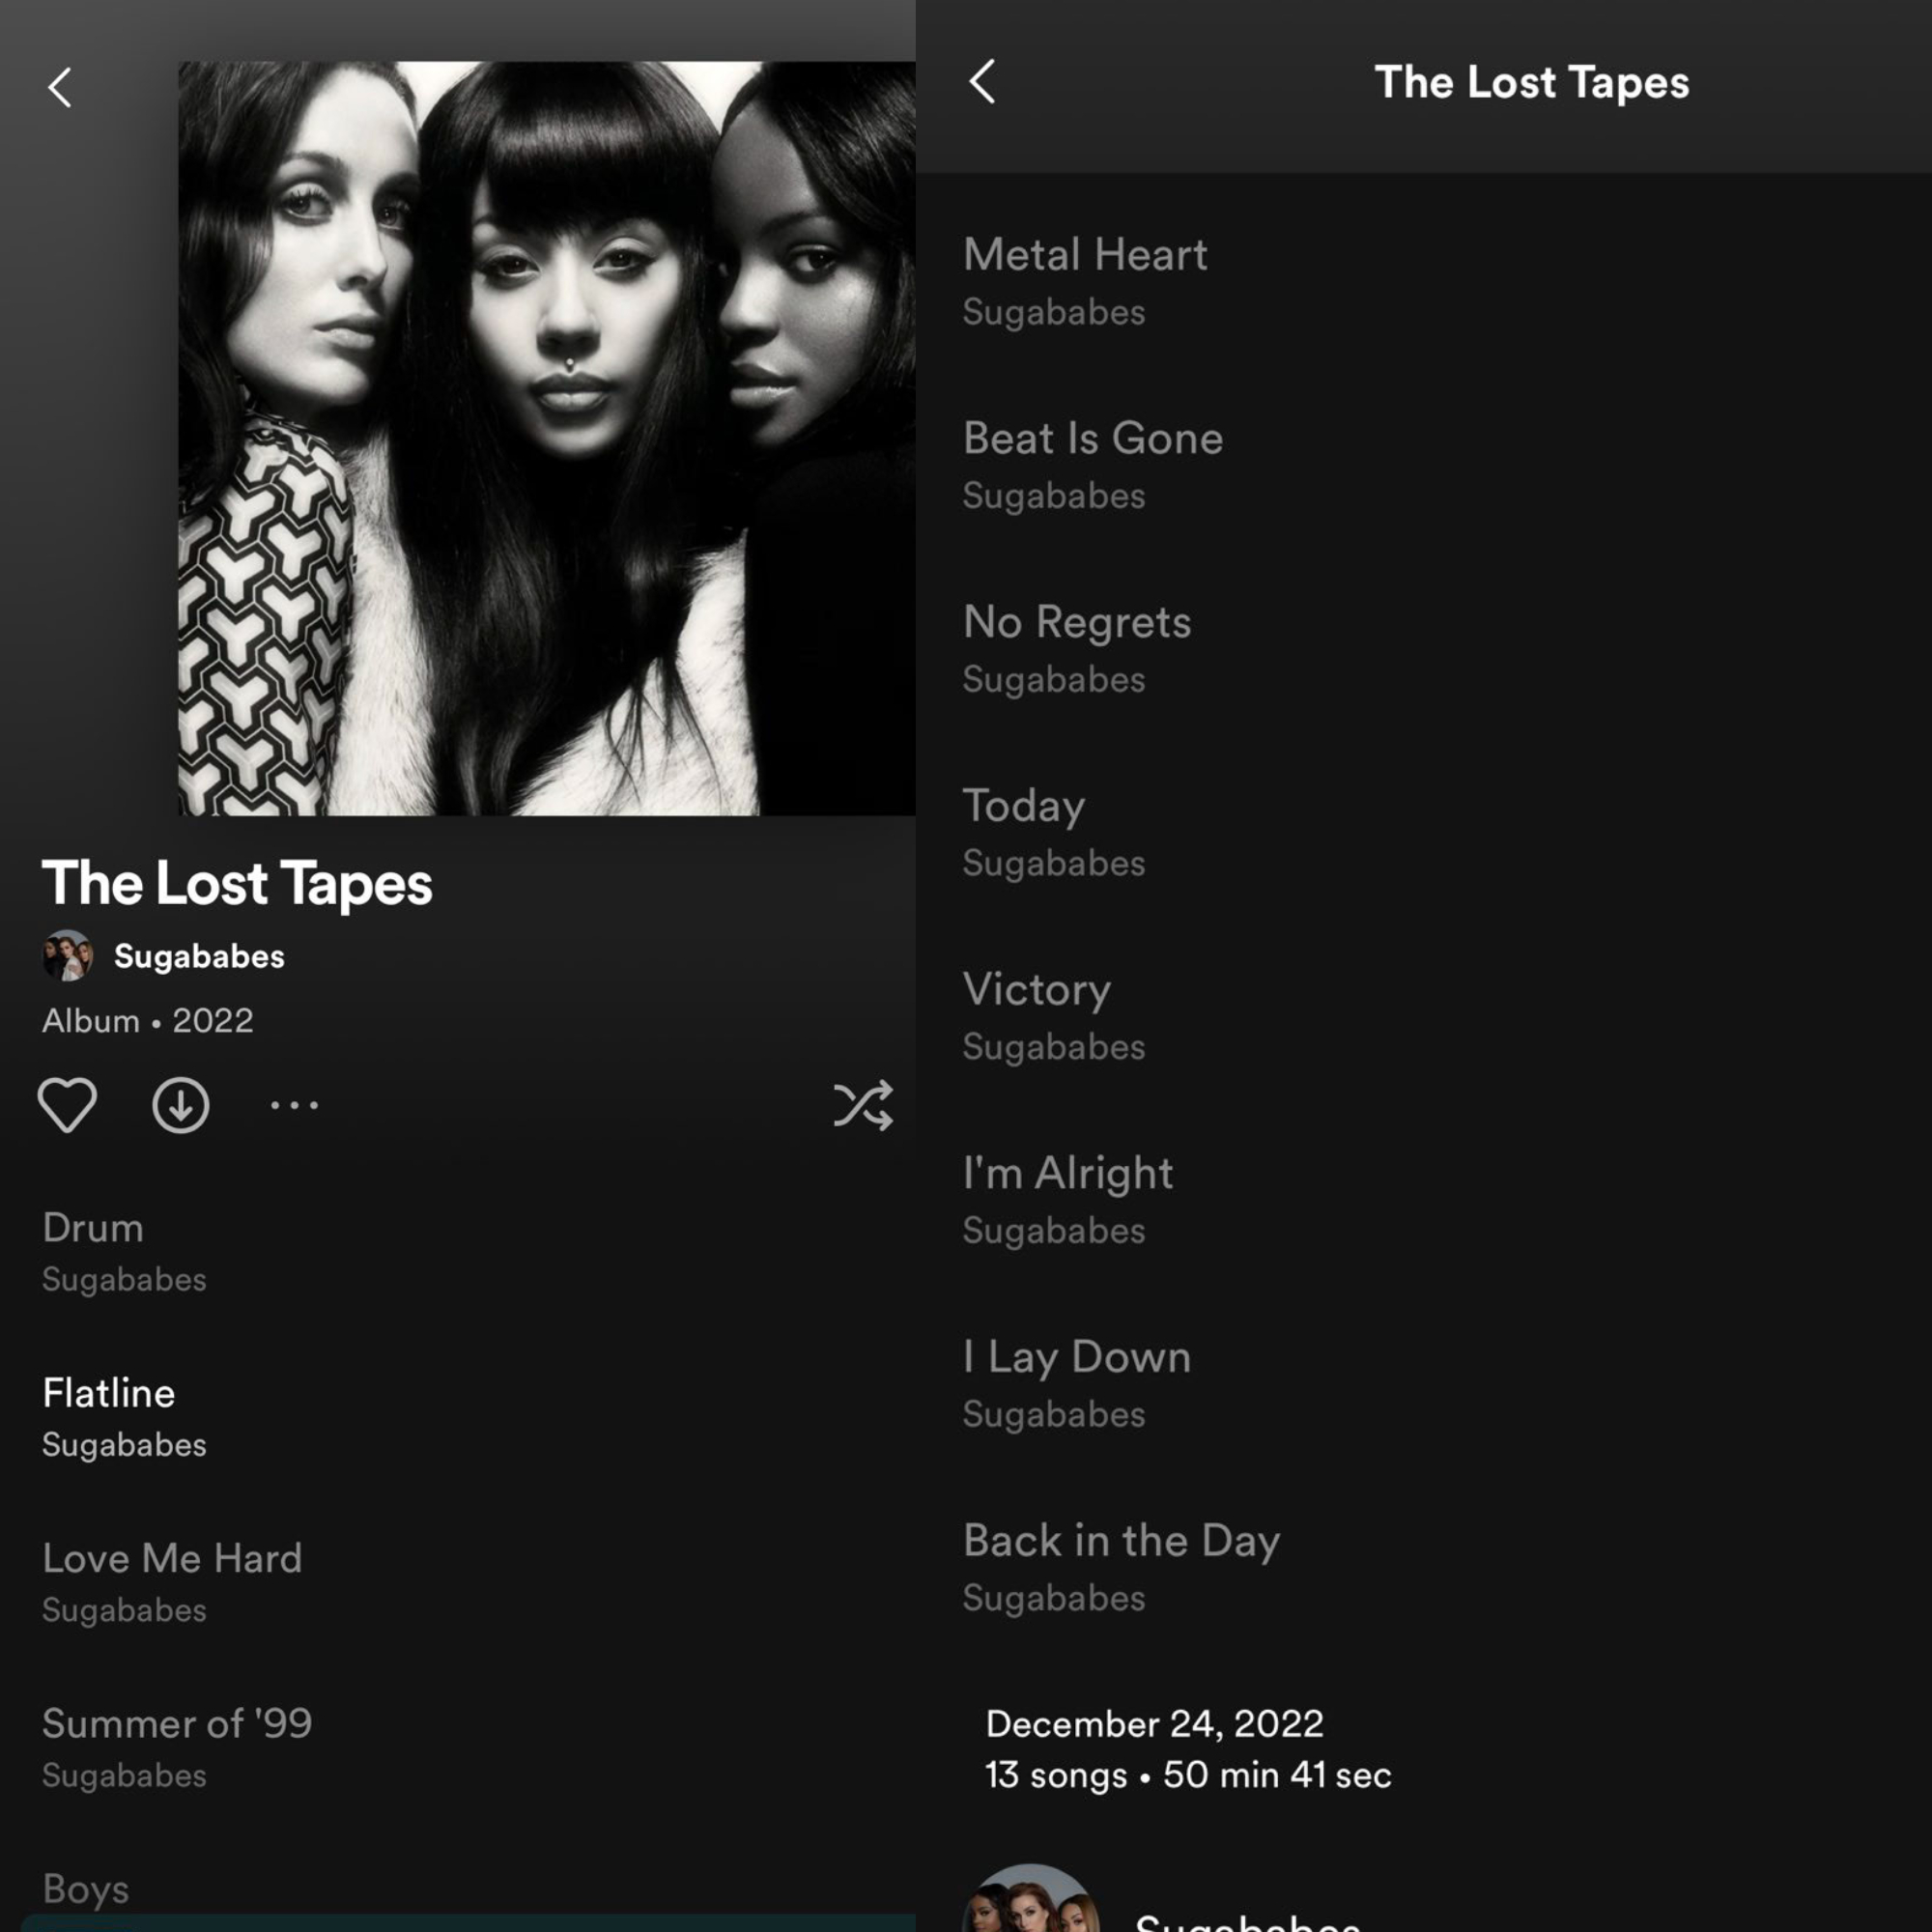 Eagle-eyed fans spotted the reveal after the album page was made available on Spotify.